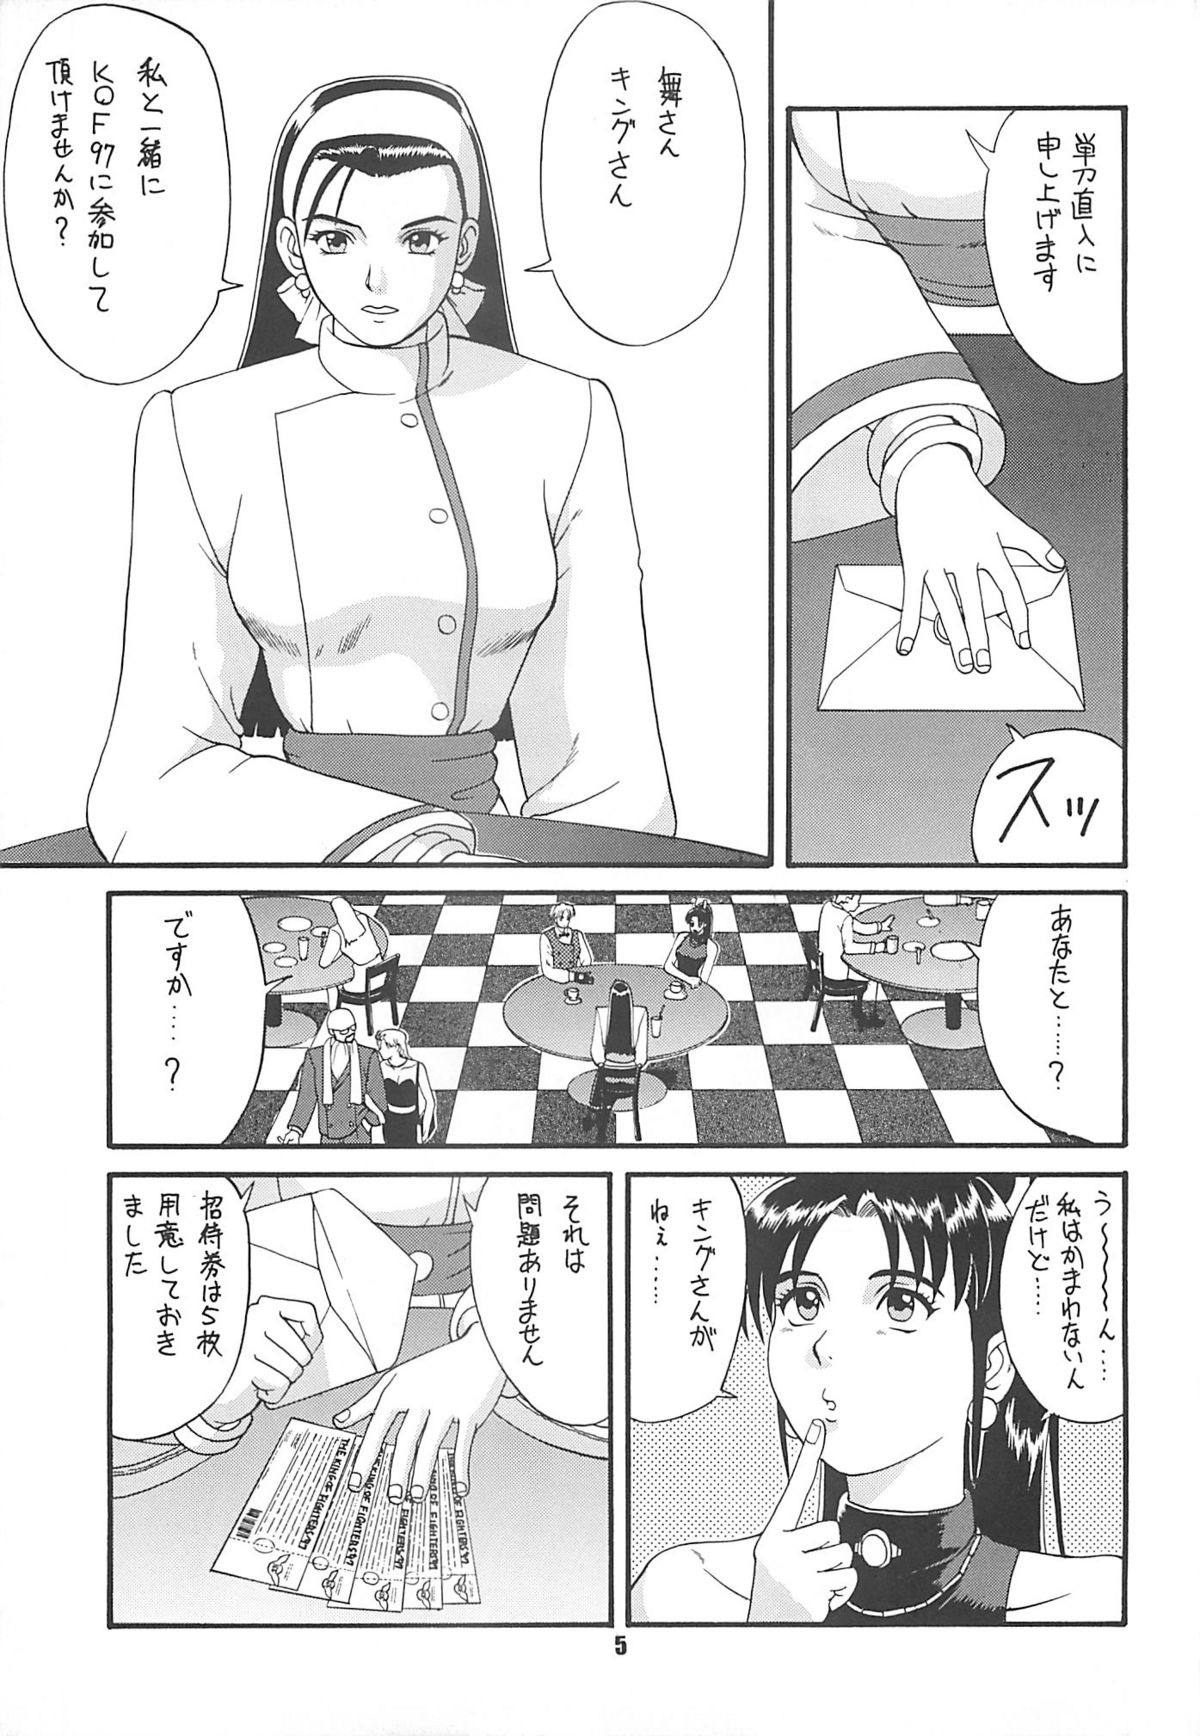 (CR22) [Saigado (Ishoku Dougen)] The Yuri & Friends '97 (King of Fighters) page 4 full